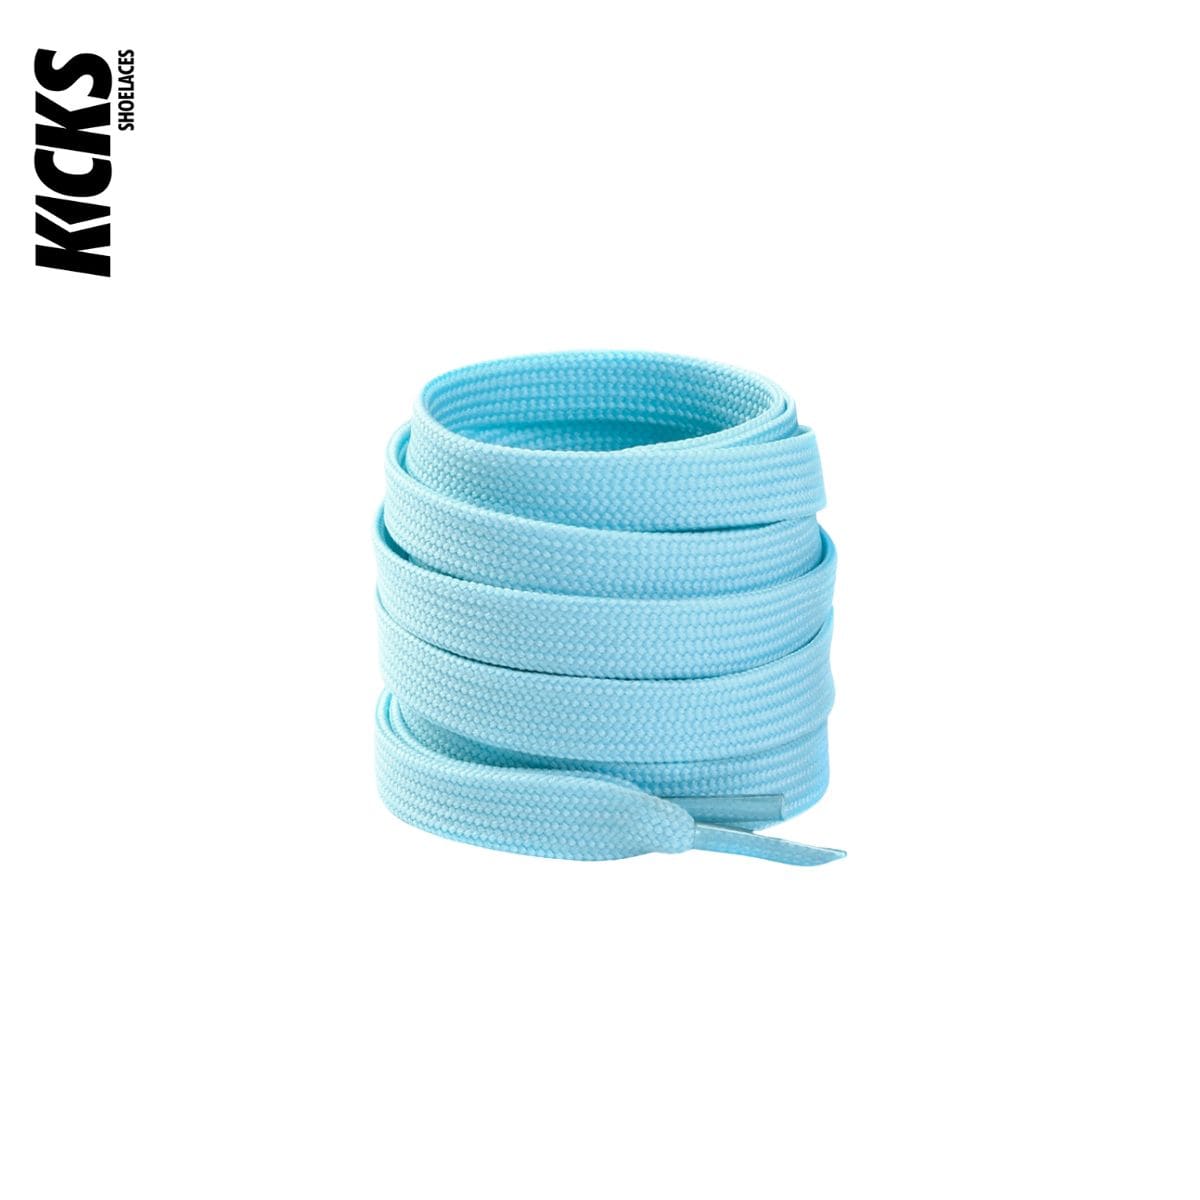 Light Blue Replacement Laces for Adidas EQT Sneakers by Kicks Shoelaces